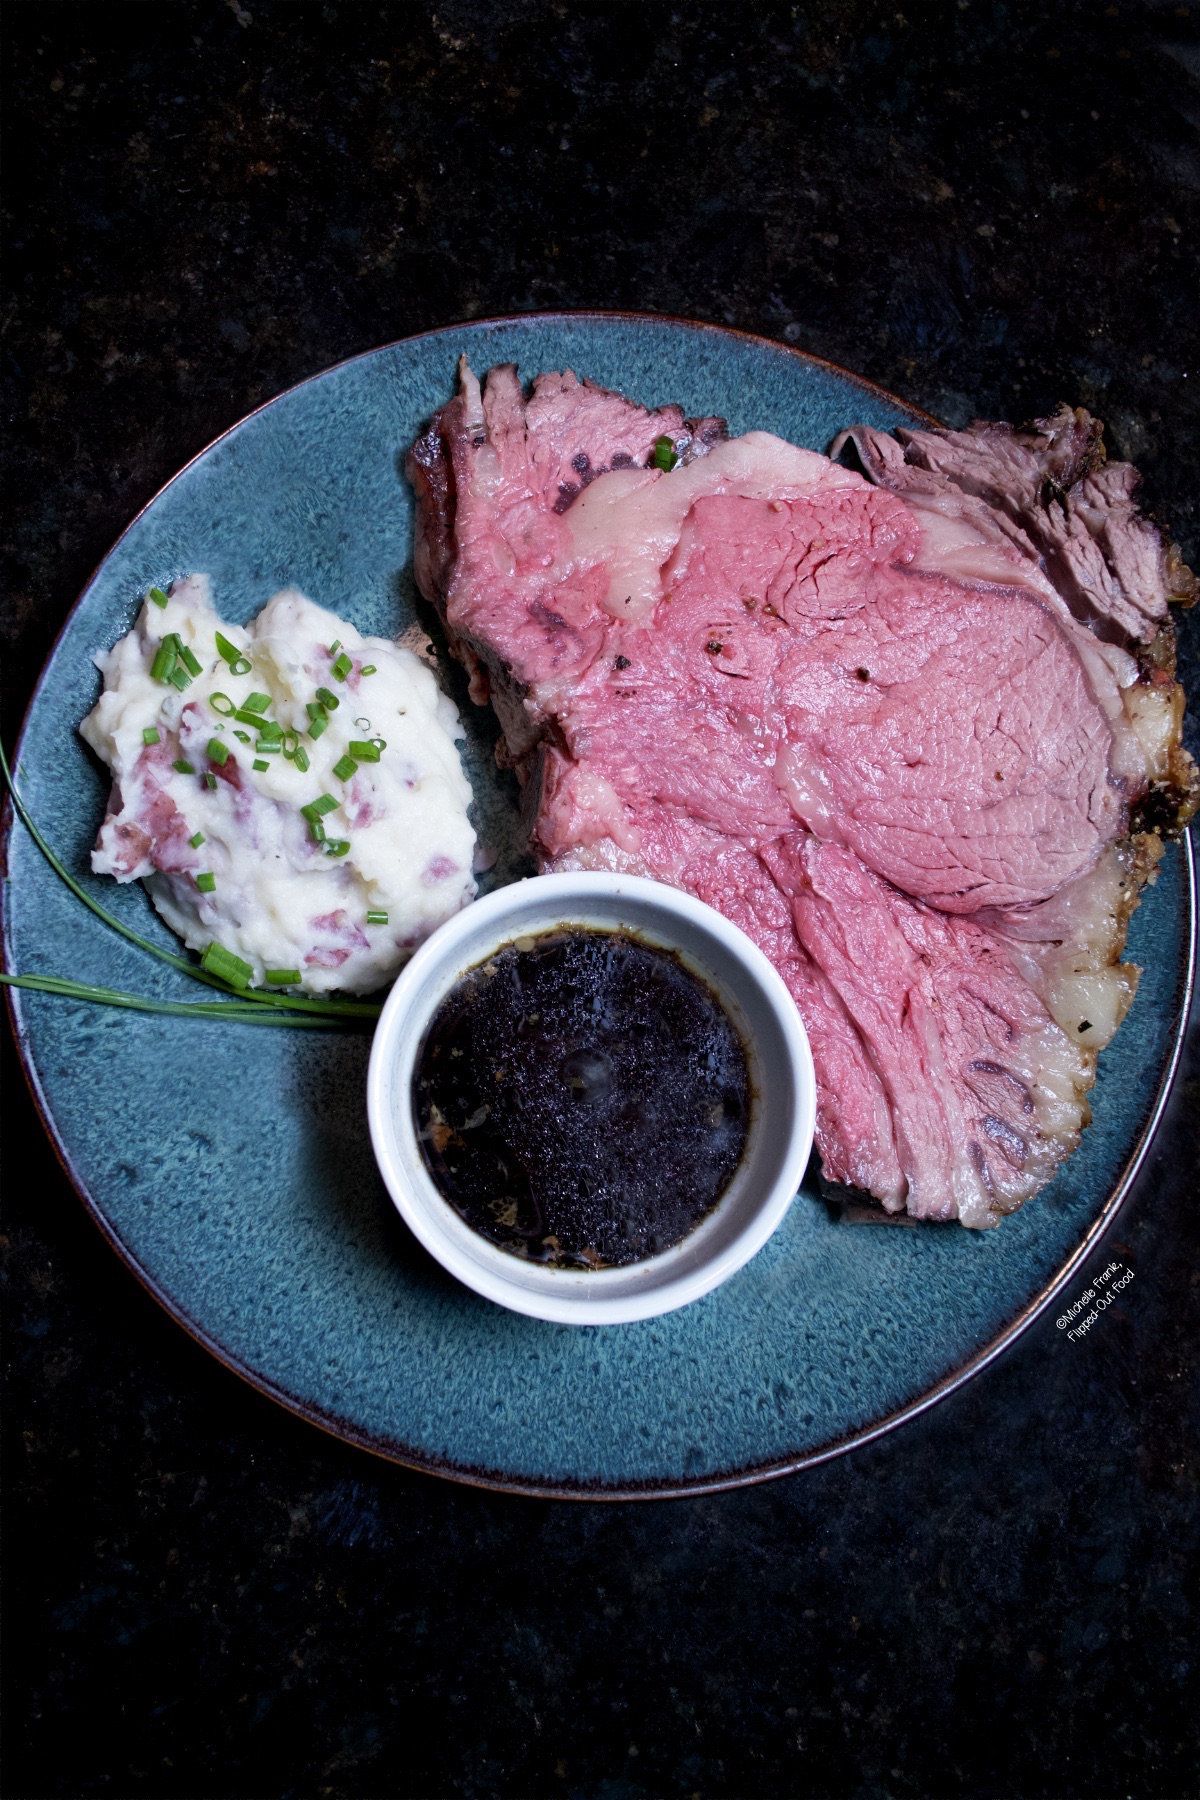 Overhead view of a beautiful slice of prime rib cooked to medium rare on a blue plate served with mashed potatoes and homemade au jus.